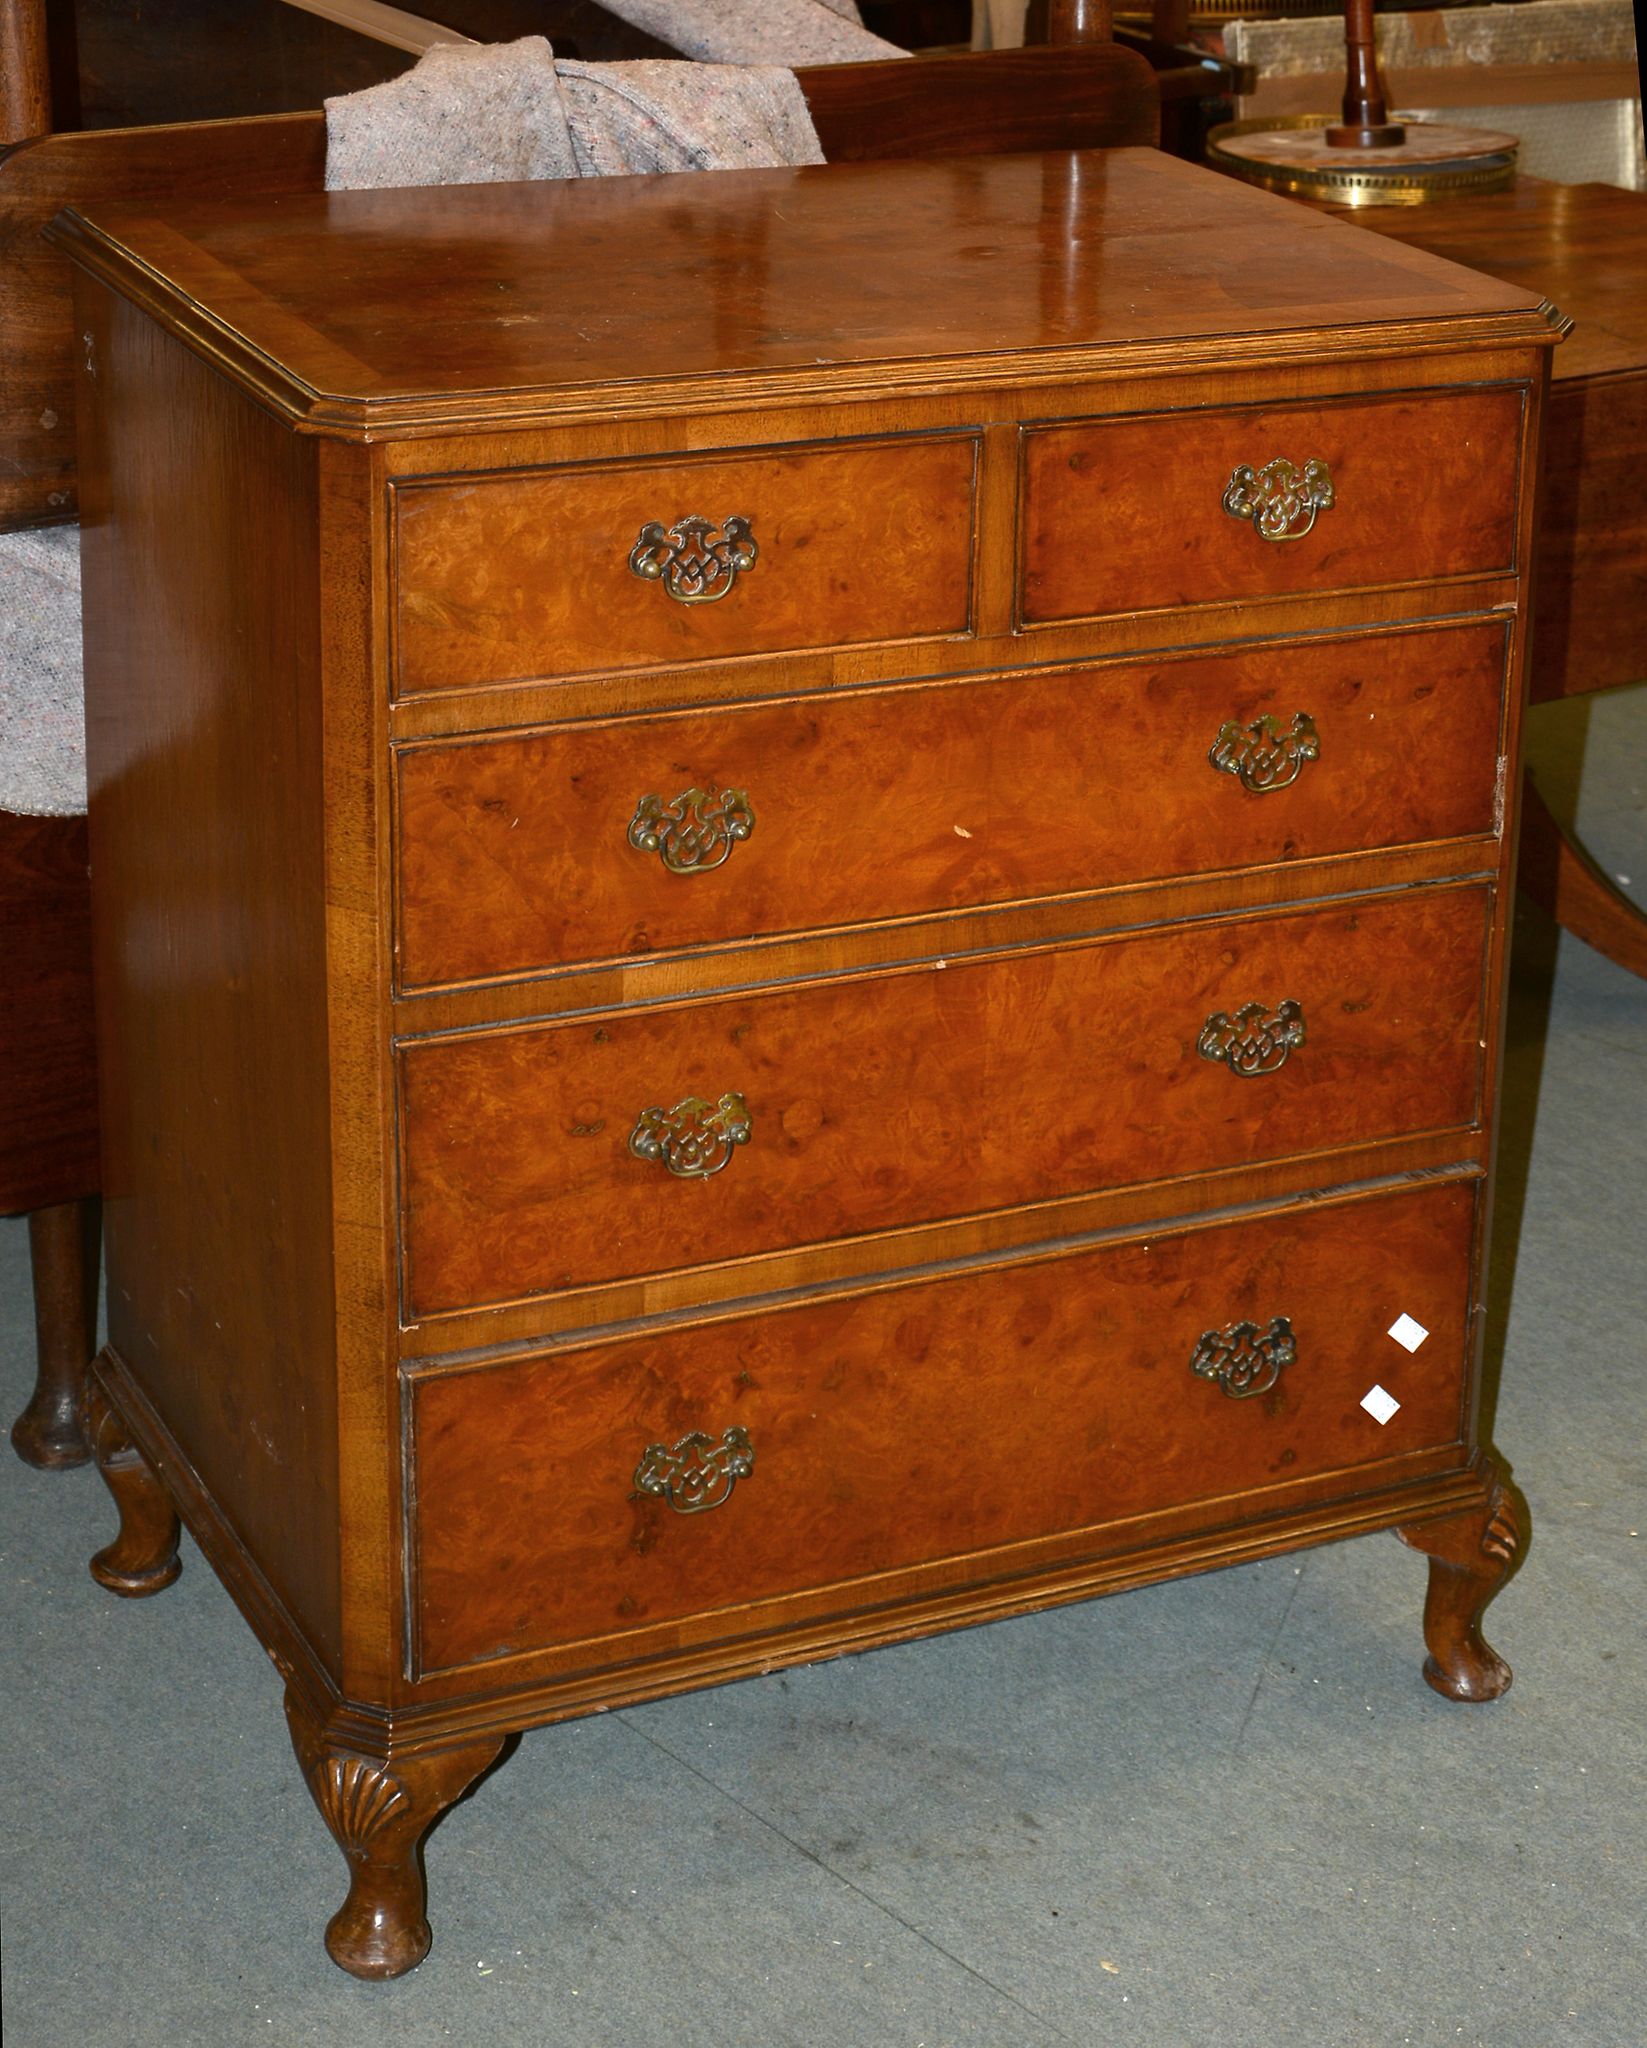 A 1930s chest of drawers in Queen Anne style